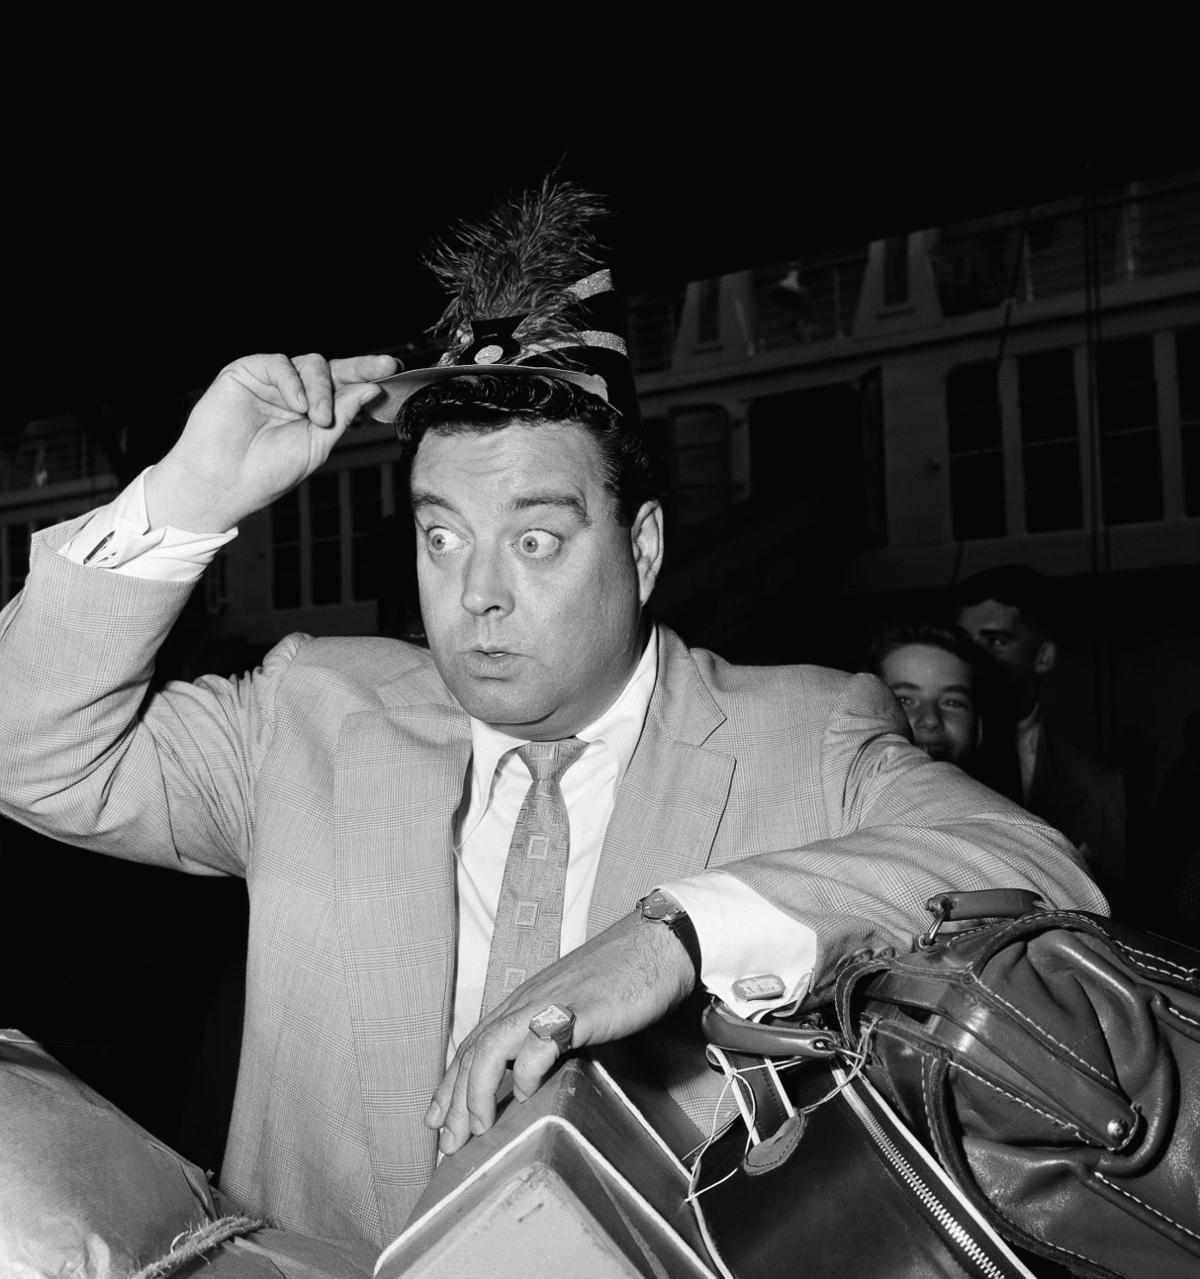 Photos: Anniversary of the birth of comedian Jackie Gleason